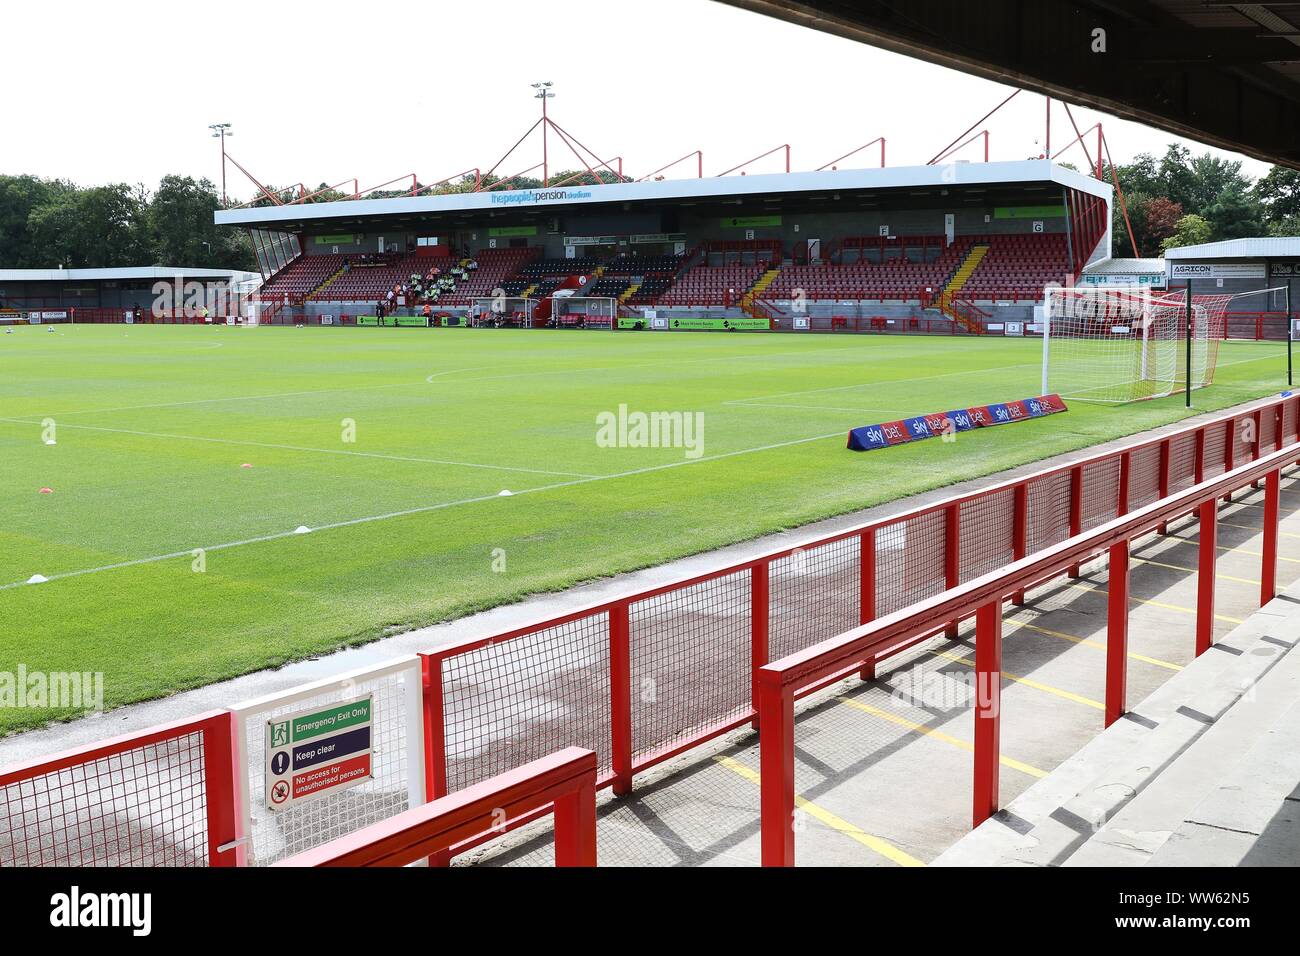 Crawley Town FC v Cheltenham Town FC  at The People's Pension Stadium (Sky Bet League Two - 31 August 2019) -  The People's Pension Stadium  Picture b Stock Photo